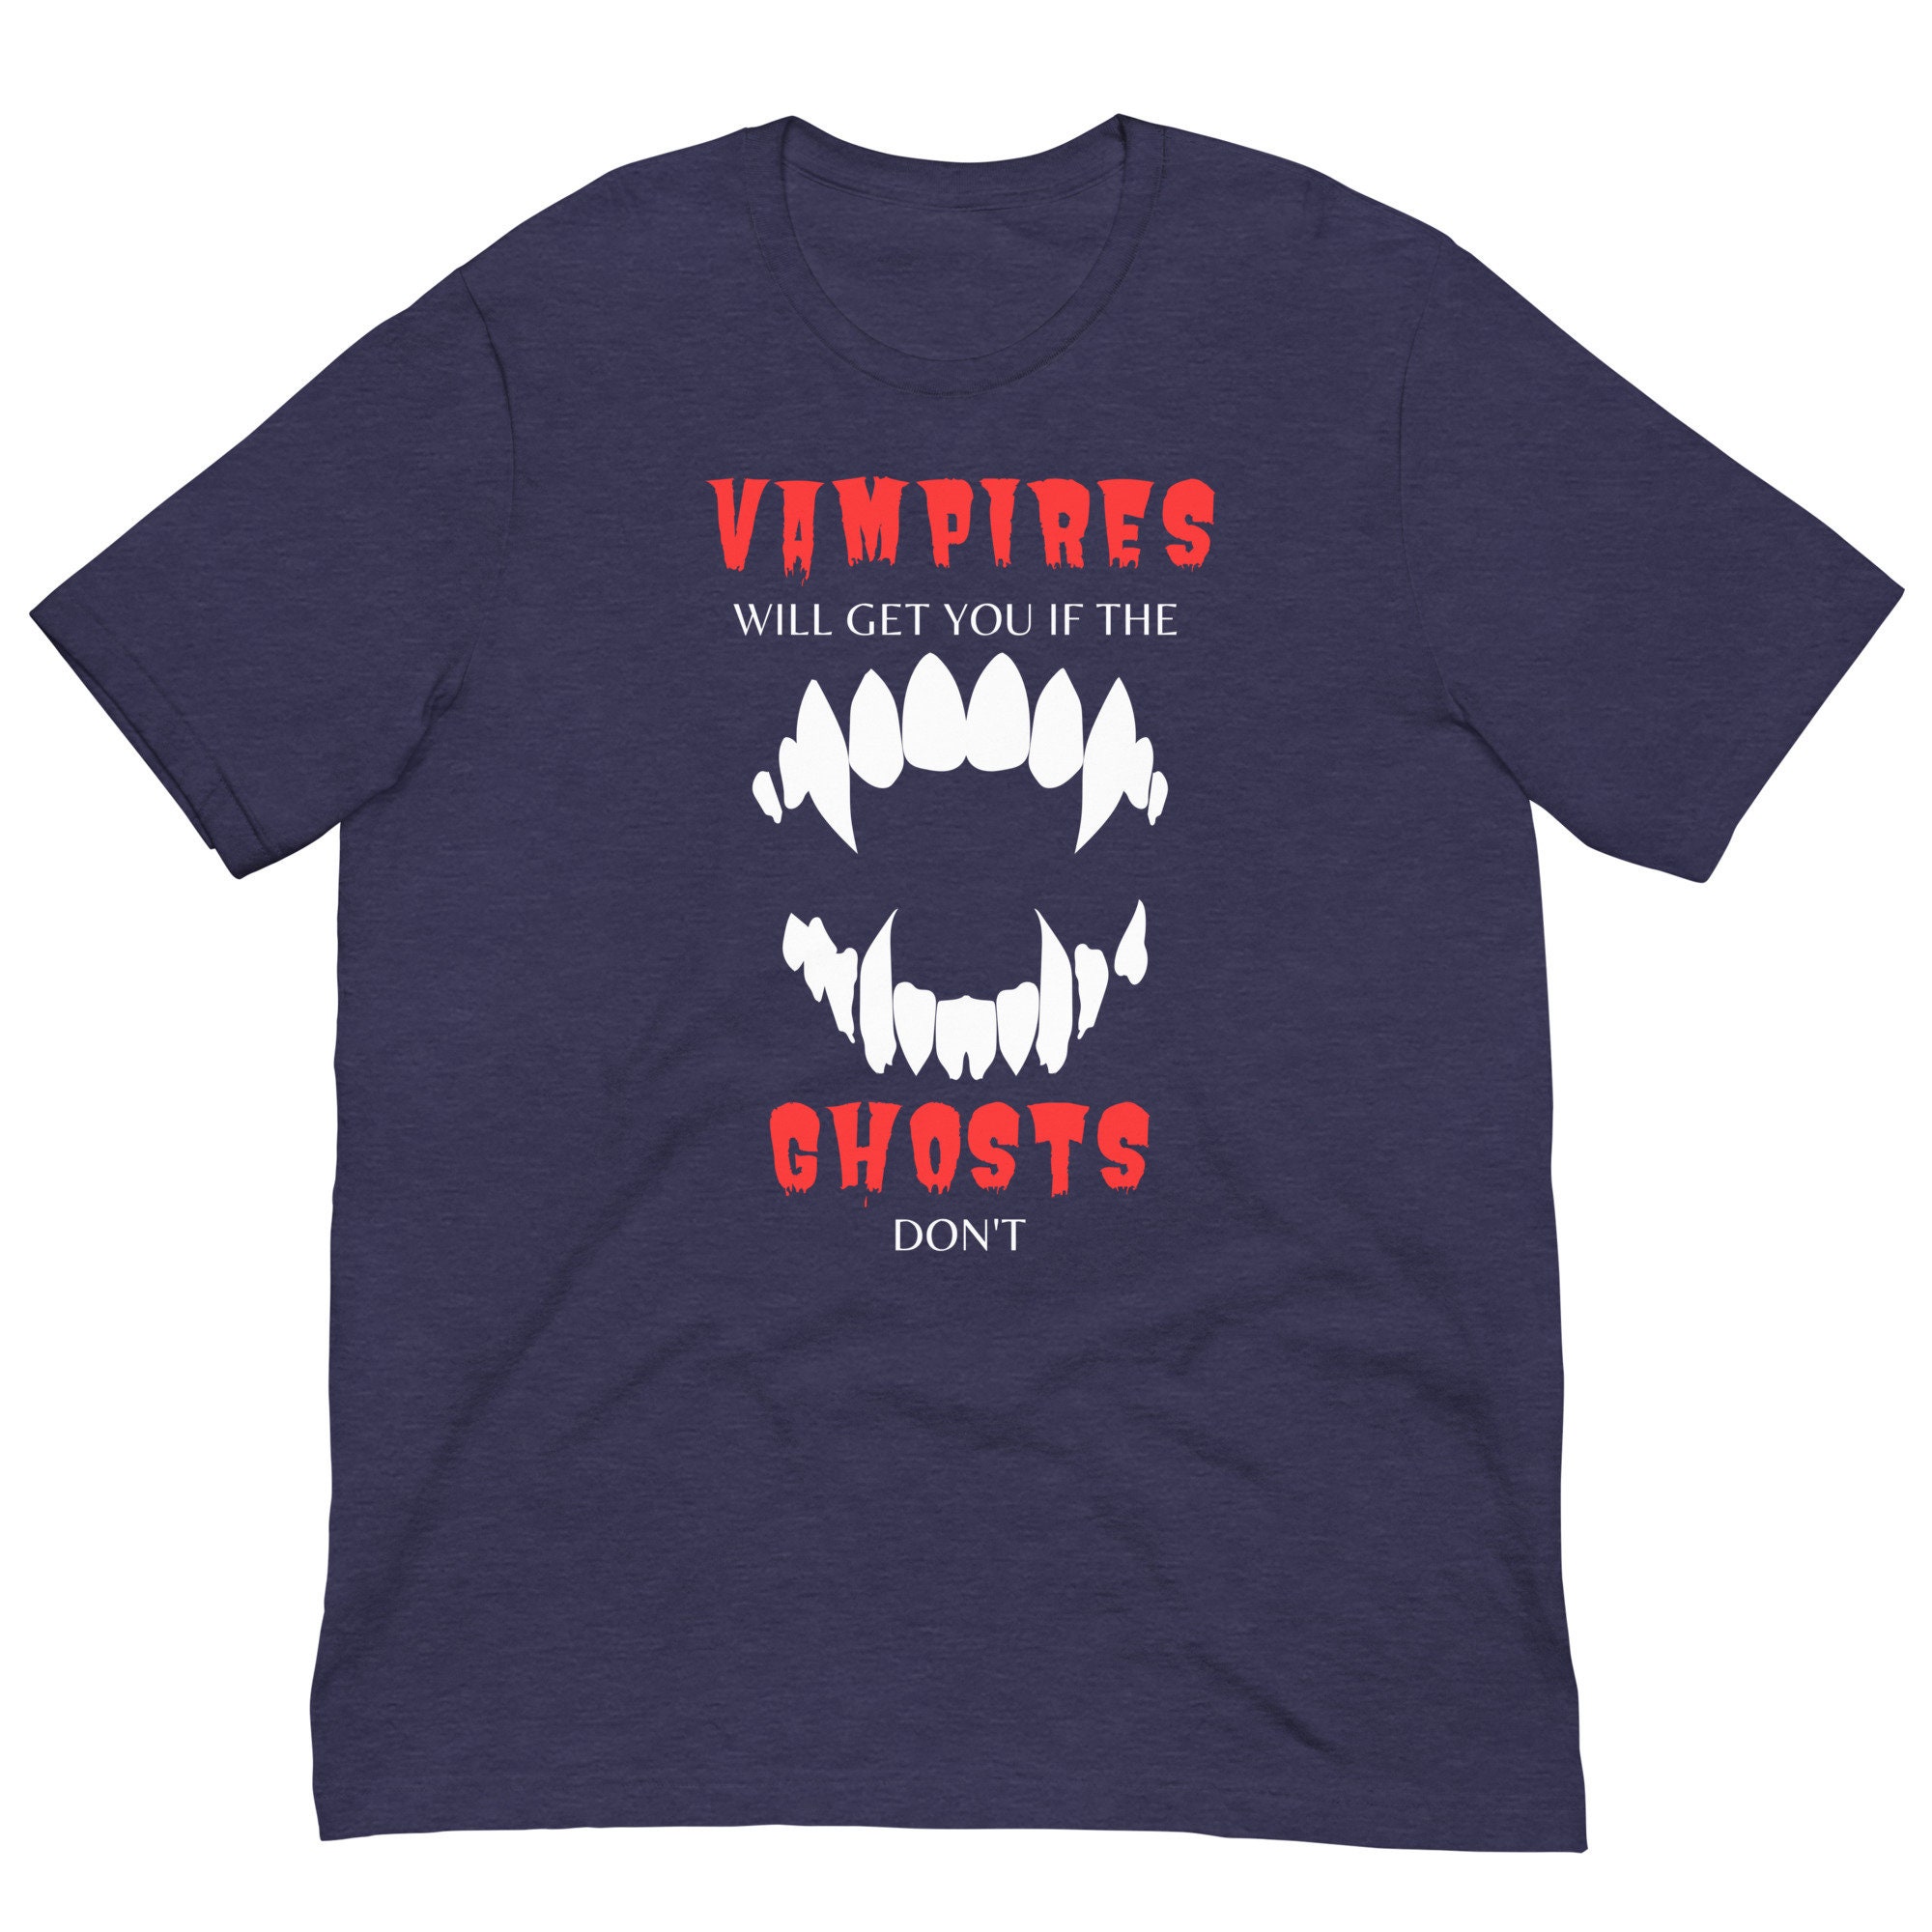 Discover Vampires will get you if ghosts don't T-shirt